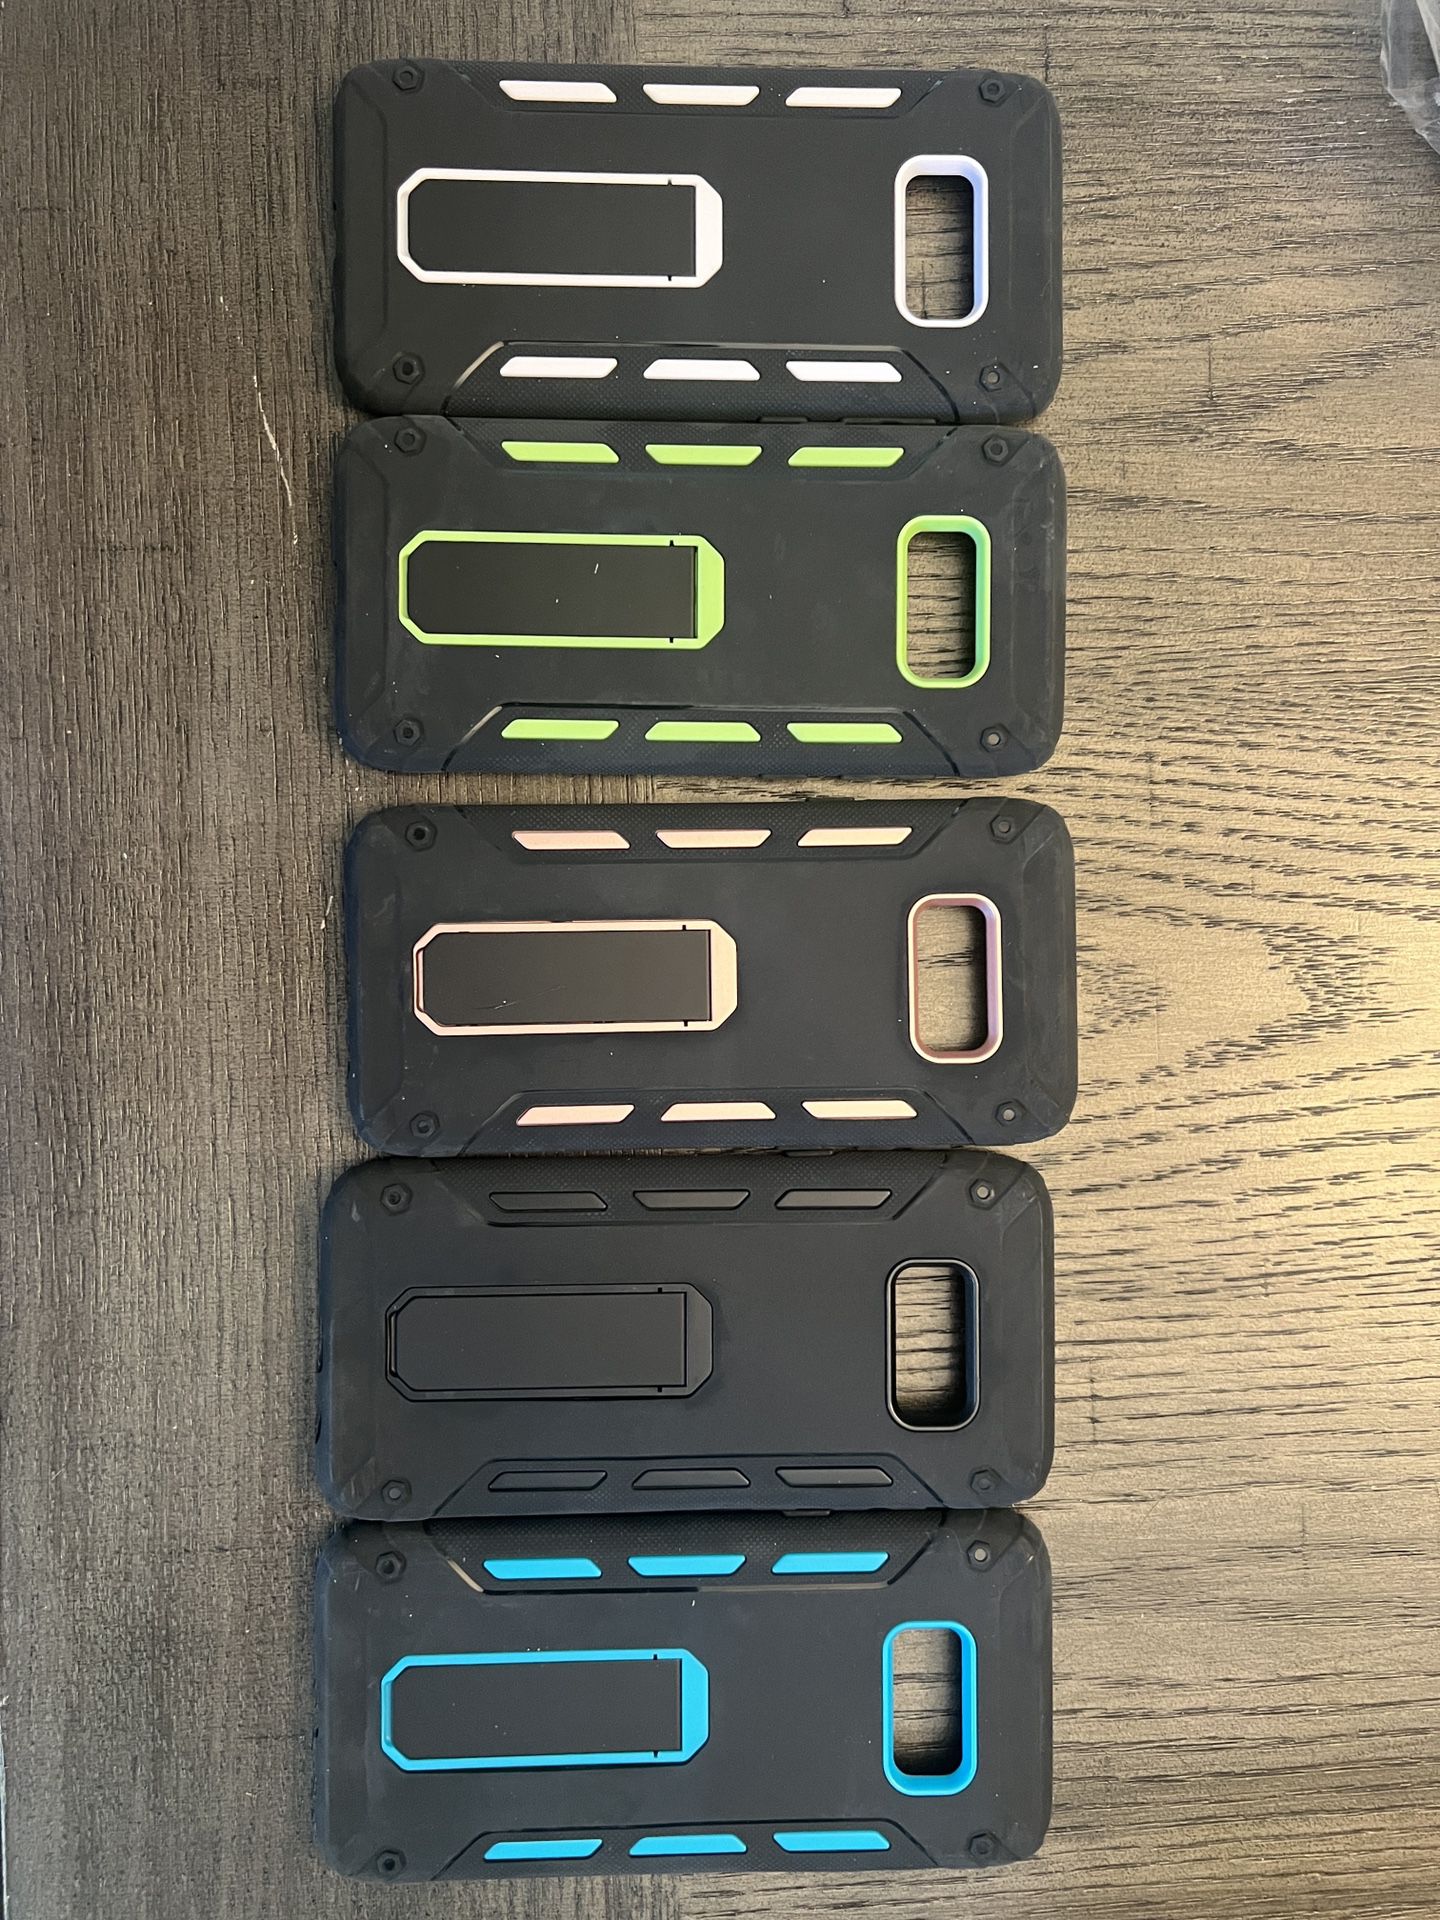 Phone Cases for Galaxy S8, S8 Plus, Note8/N950F, iPhone X, XS